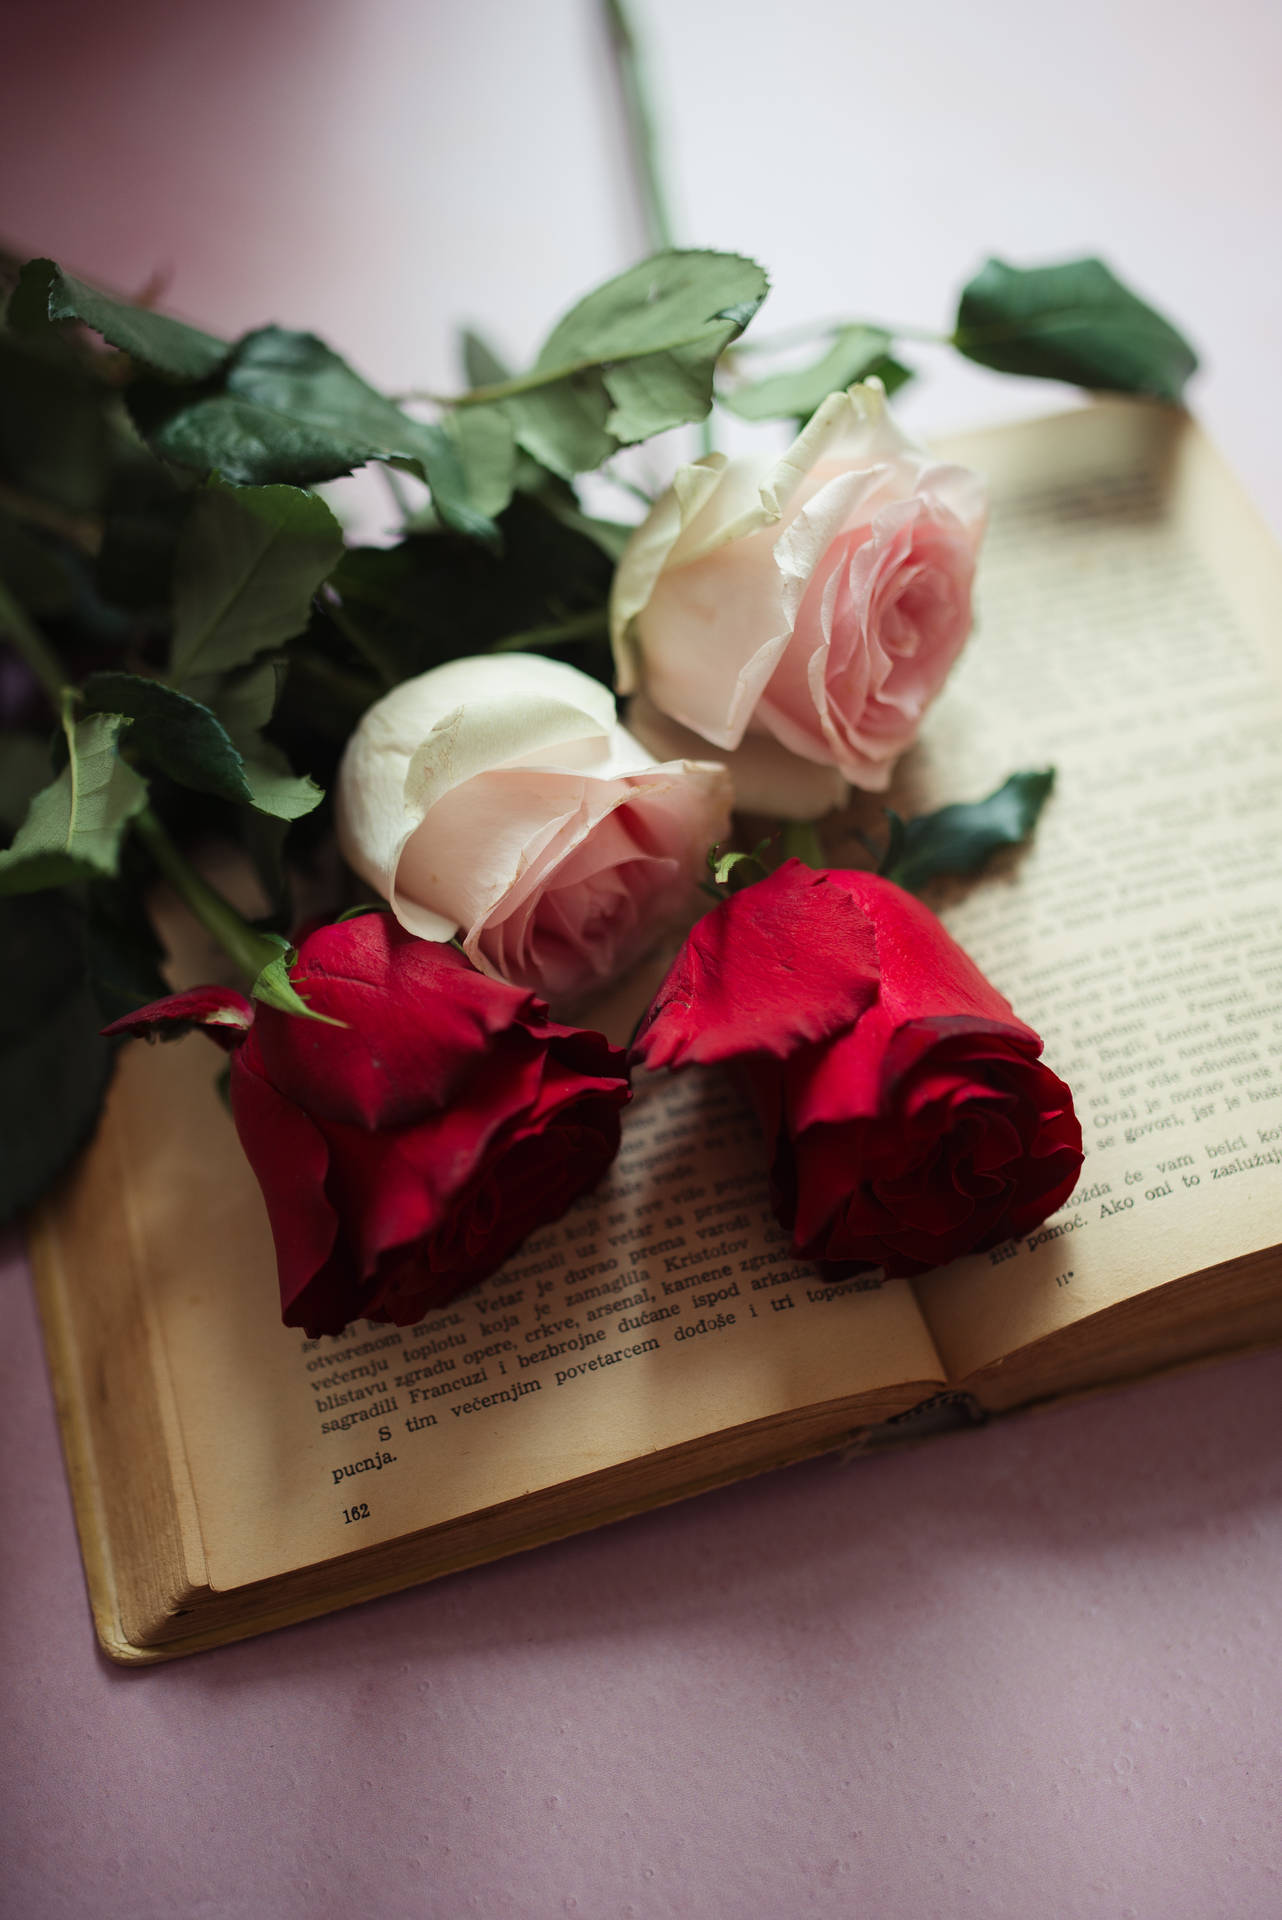 Aesthetic Rose Flowers On A Book